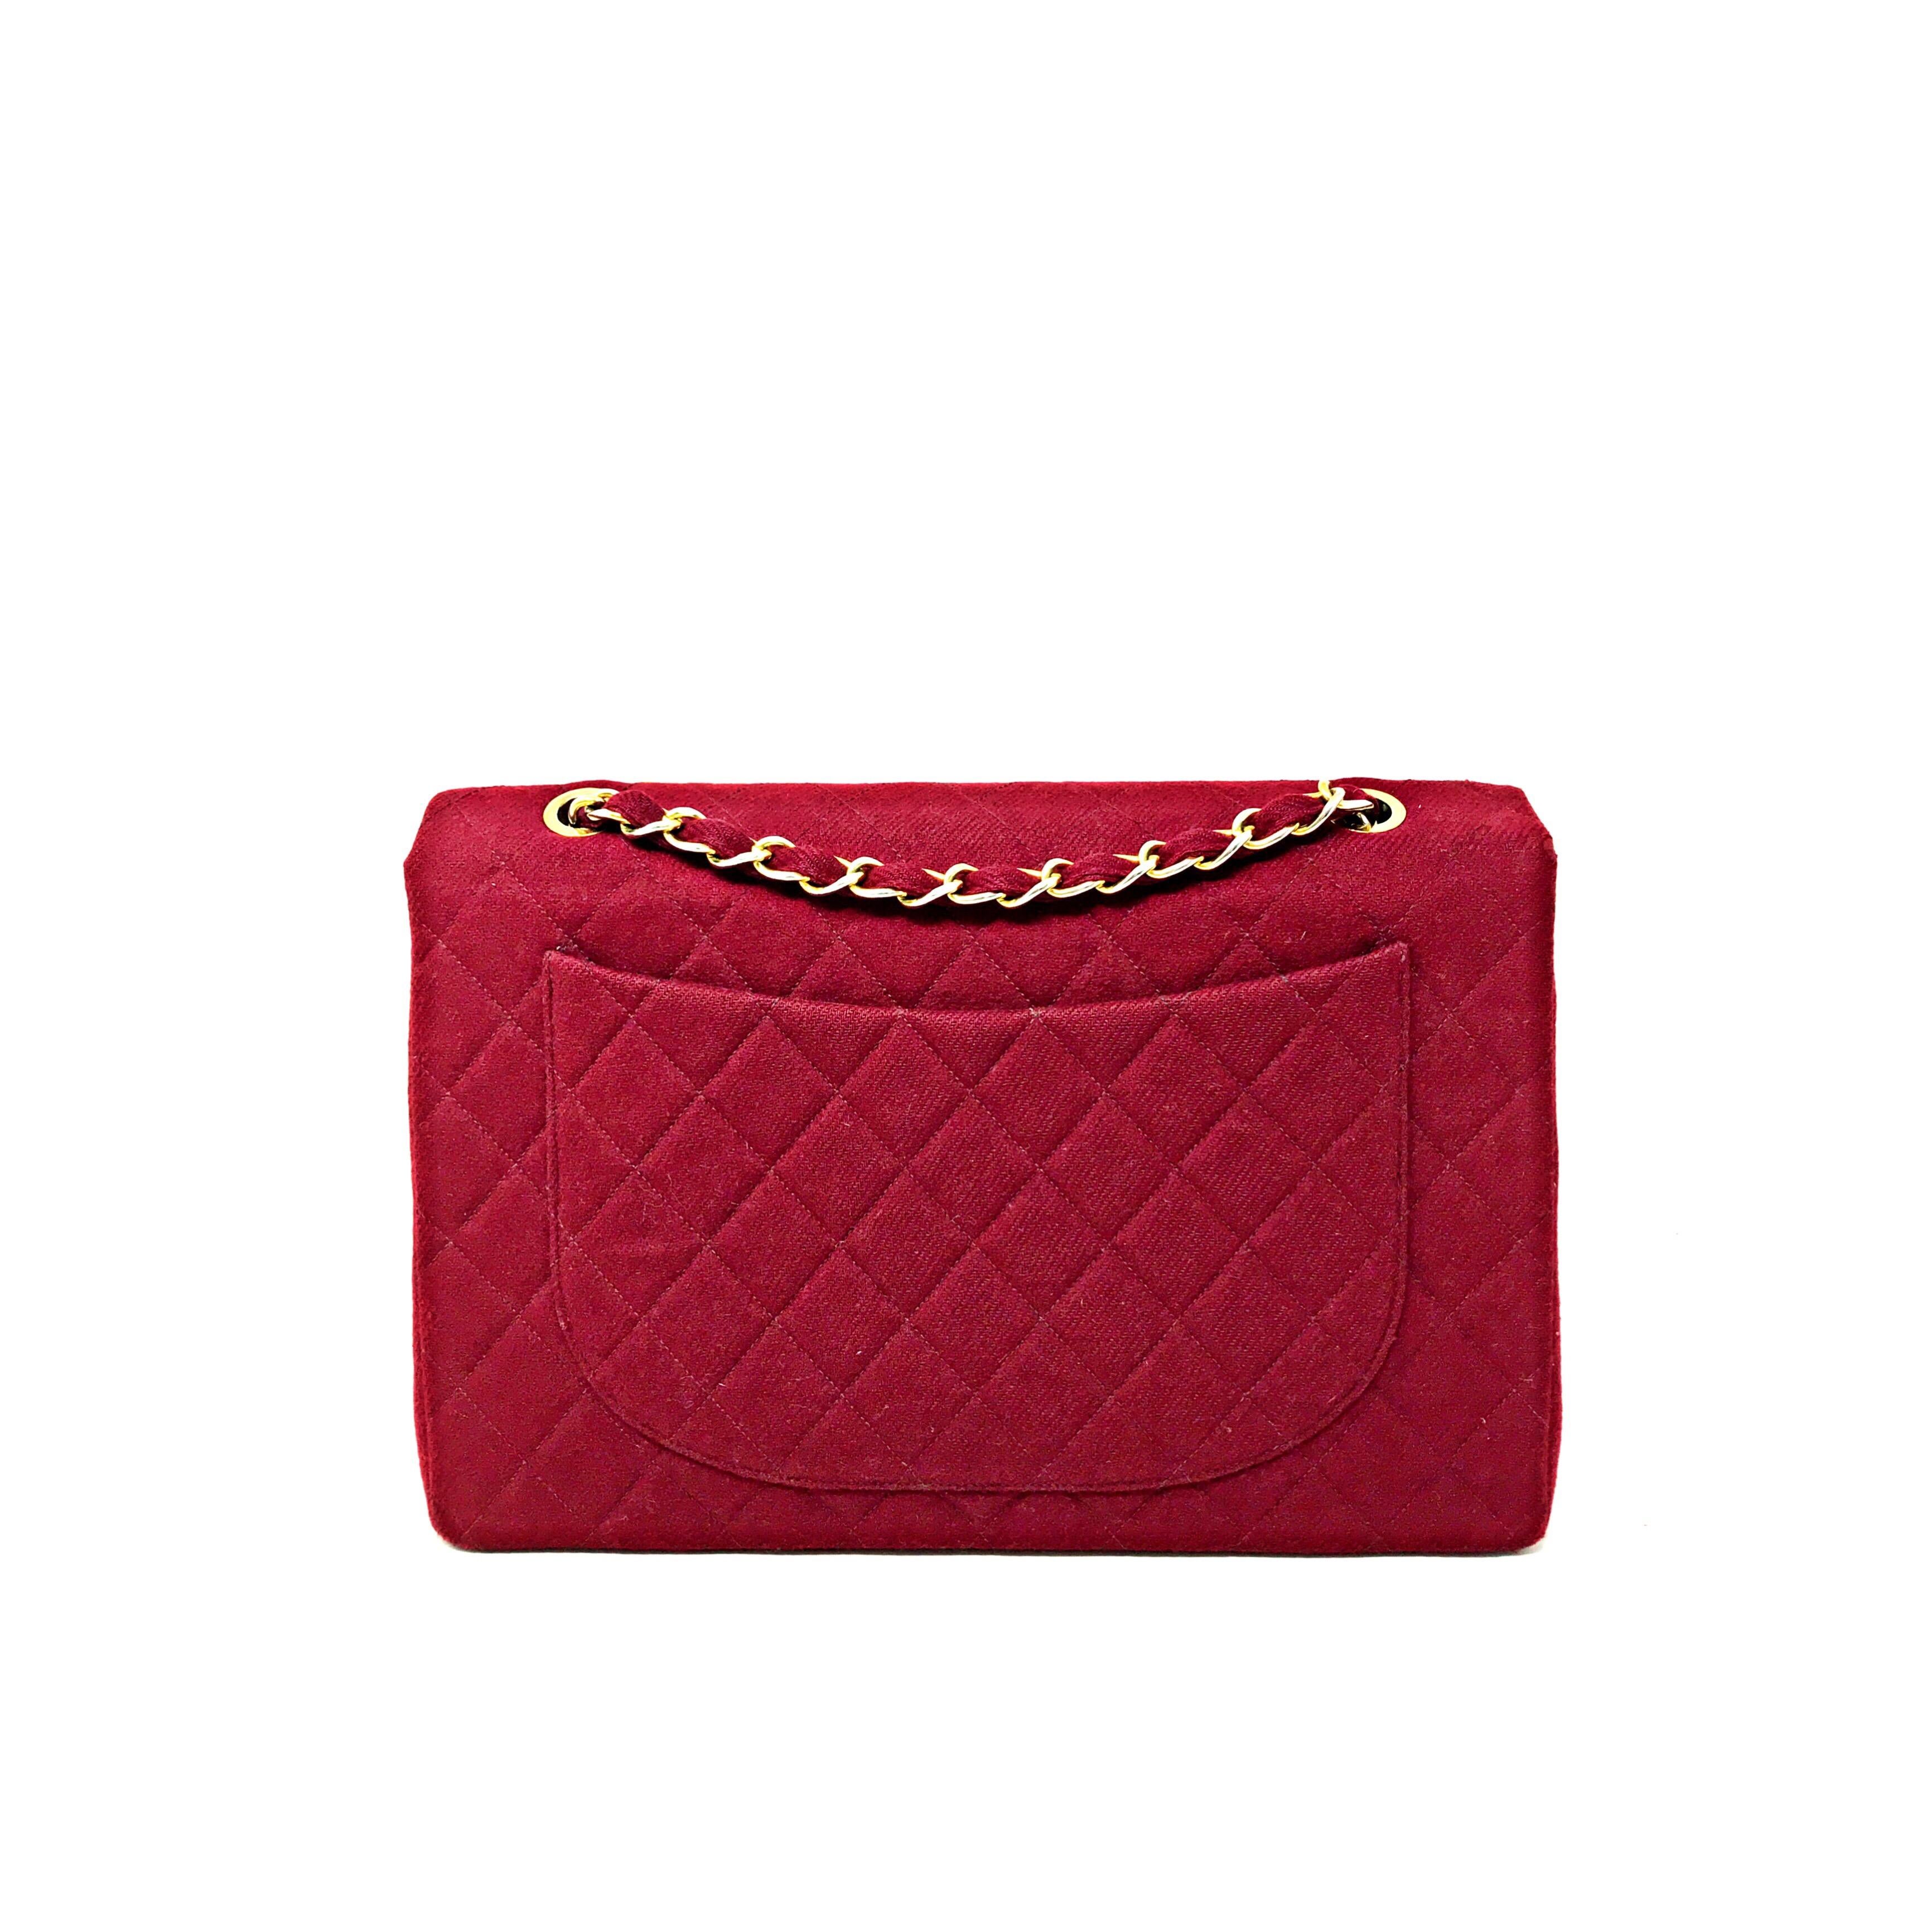 Chanel Maxi Jumbo Vintage in felt bordeaux. 
Hdw Gold, is not complete with card and internal code. It is carried on the shoulder.
Very Good condition. 
Dimensions 34 x 24 x 10 cm. 